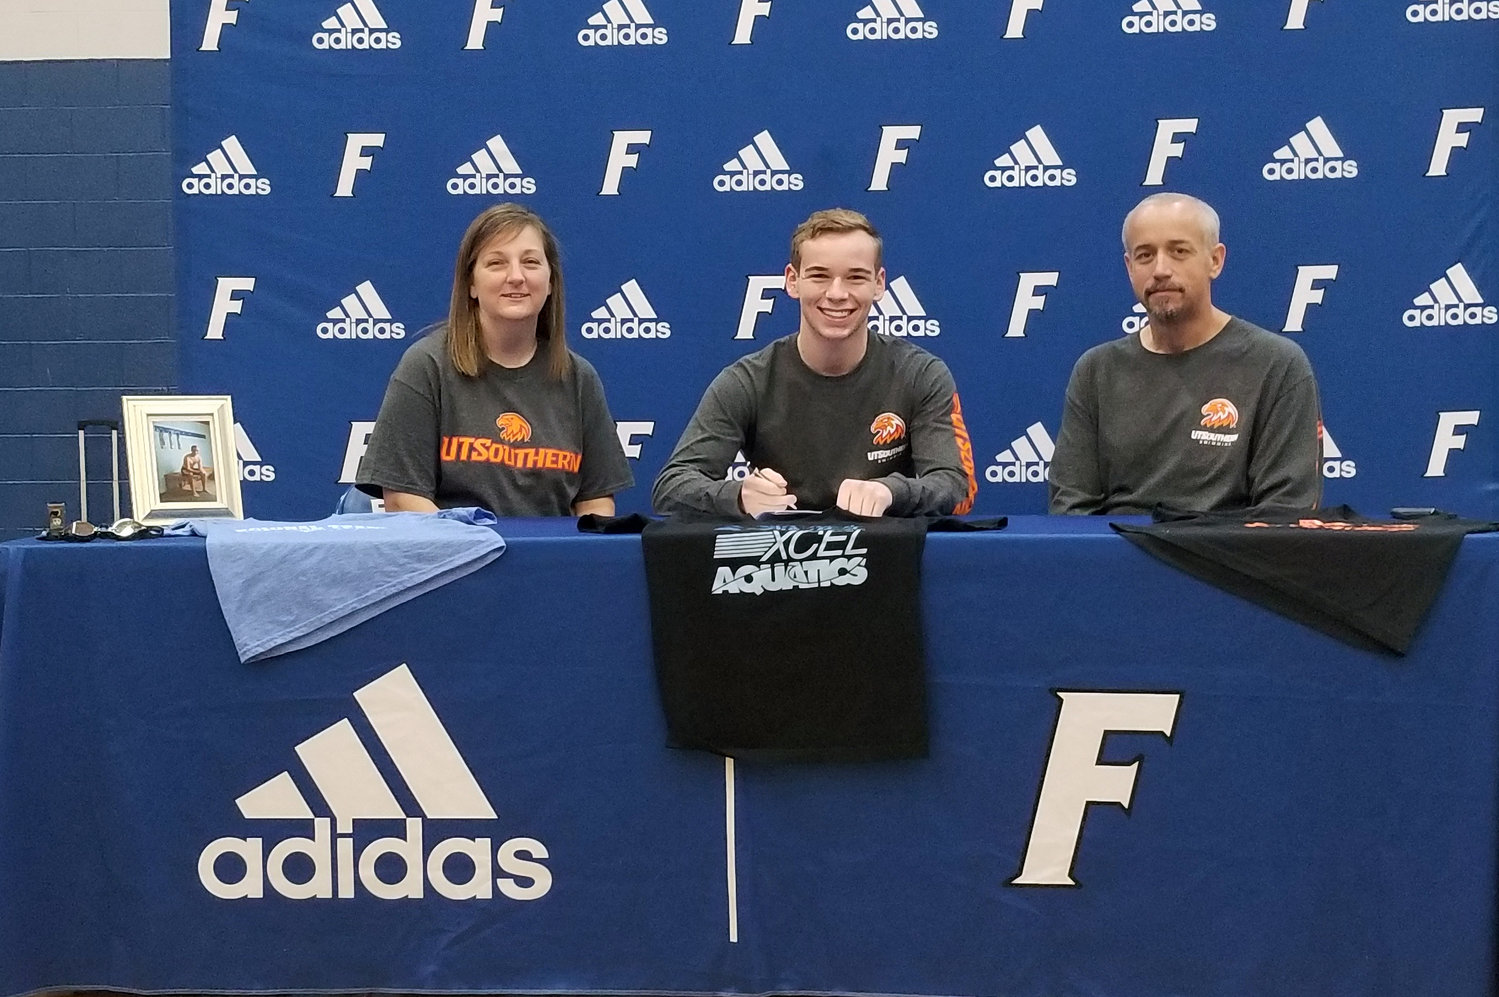 Hayden Milligan is joined by his family as he signs his letter of intent to swim for UT-Southern next season. Milligan is the first swimmer from Chapel Hill and the first male swimmer from Marshall County to sign a letter of intent to swim in college.